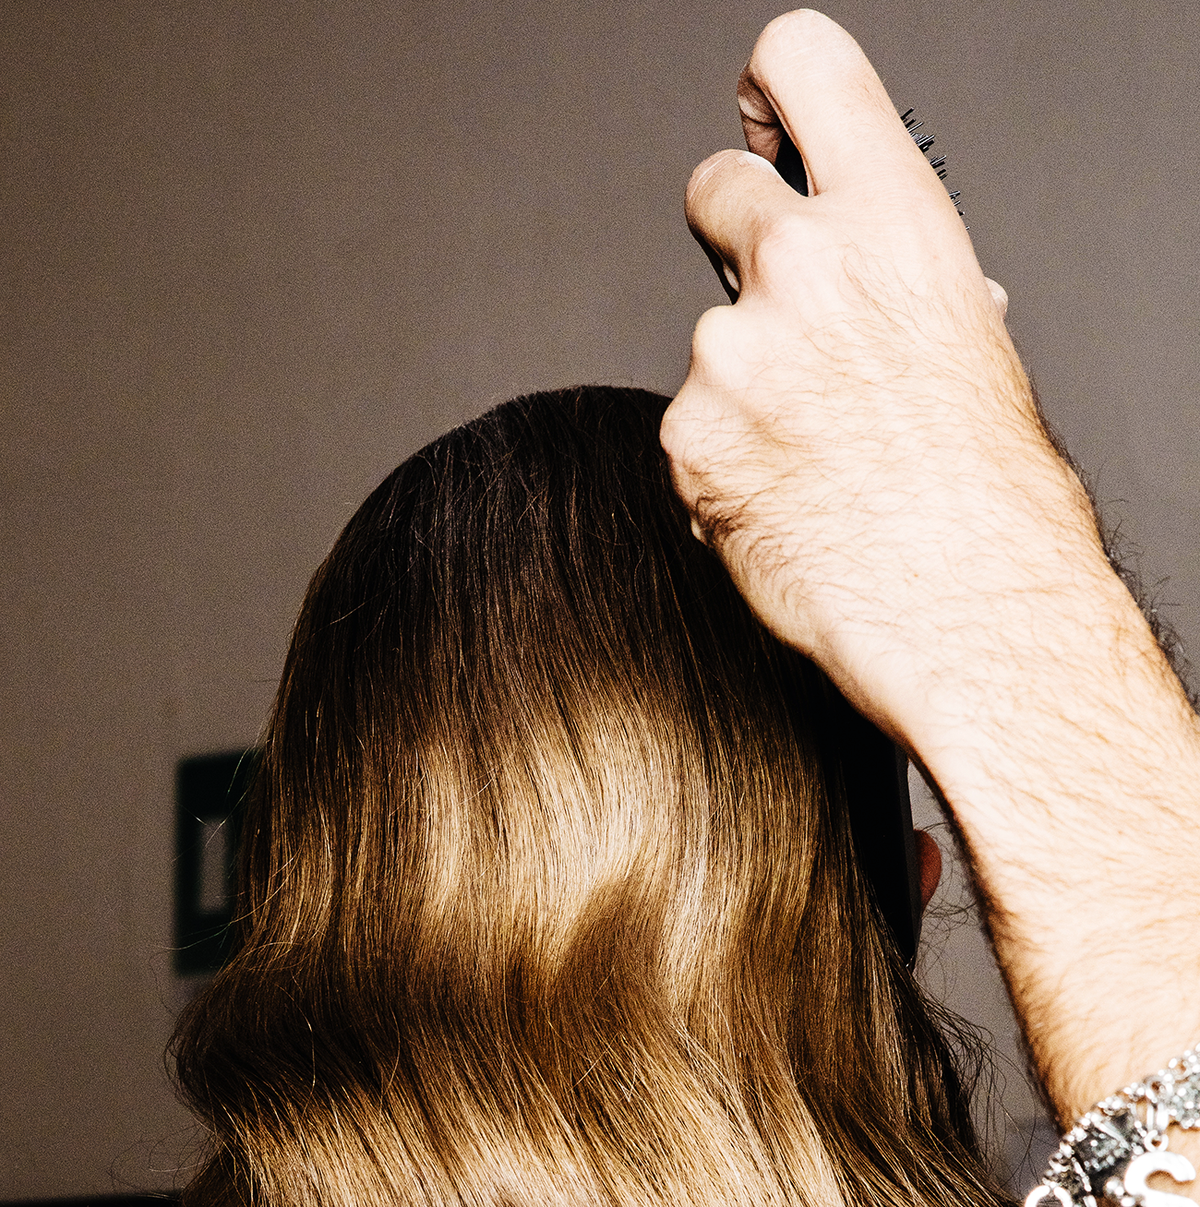 How to Get Gorgeous Hair - Professional Hairstylist Tips for Your Best Hair